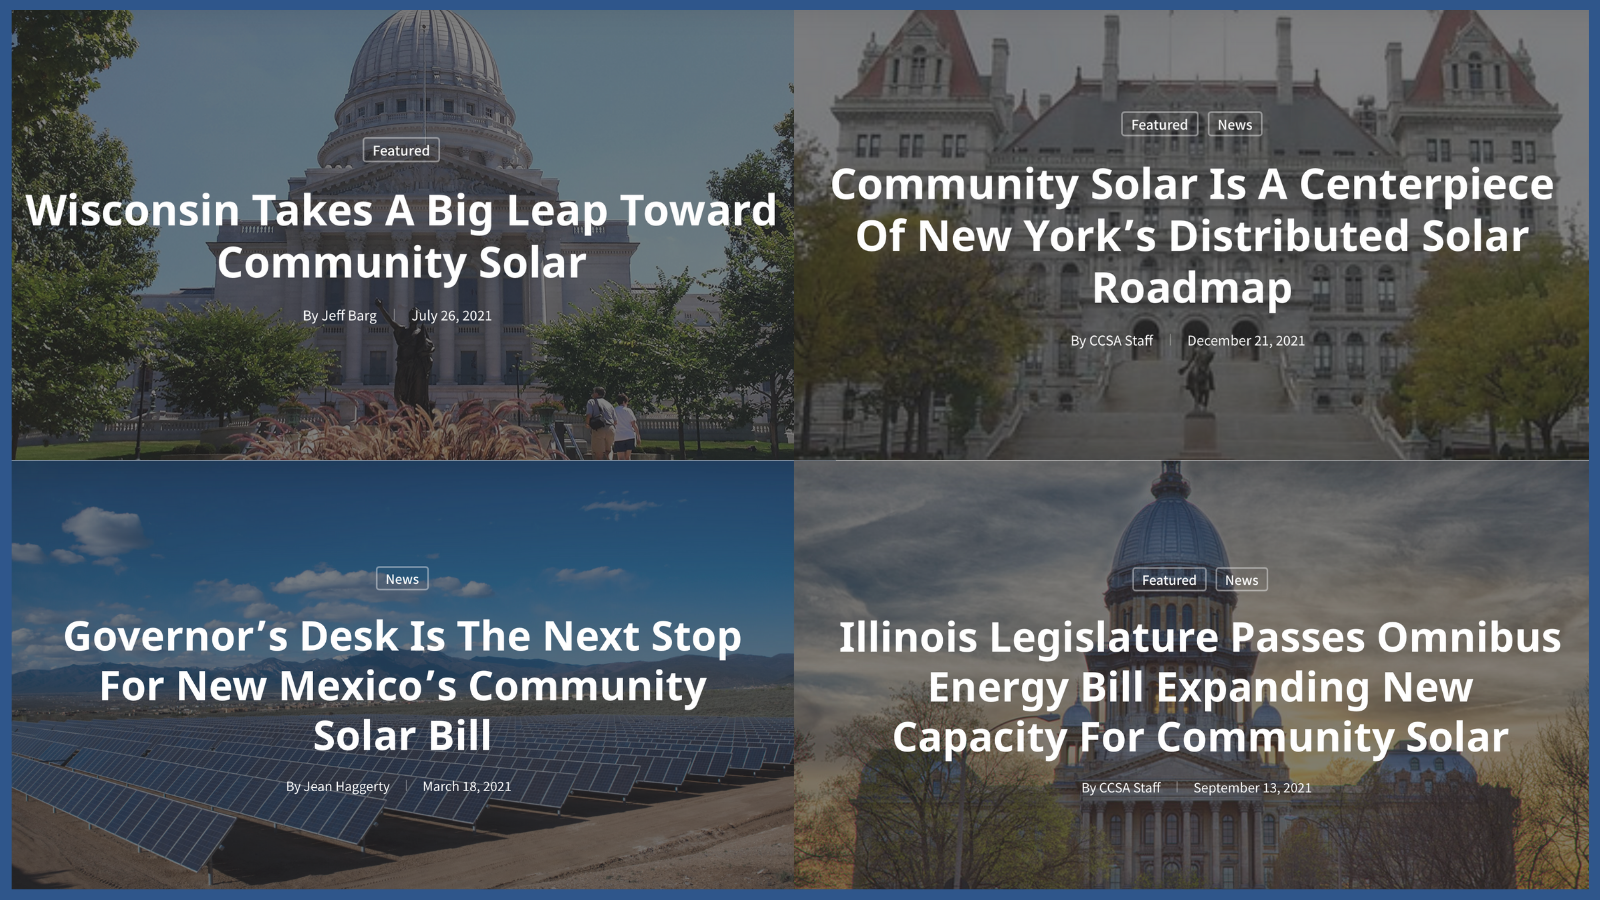 That’s a Wrap! A Look at the Top 5 Community Solar Successes of 2021